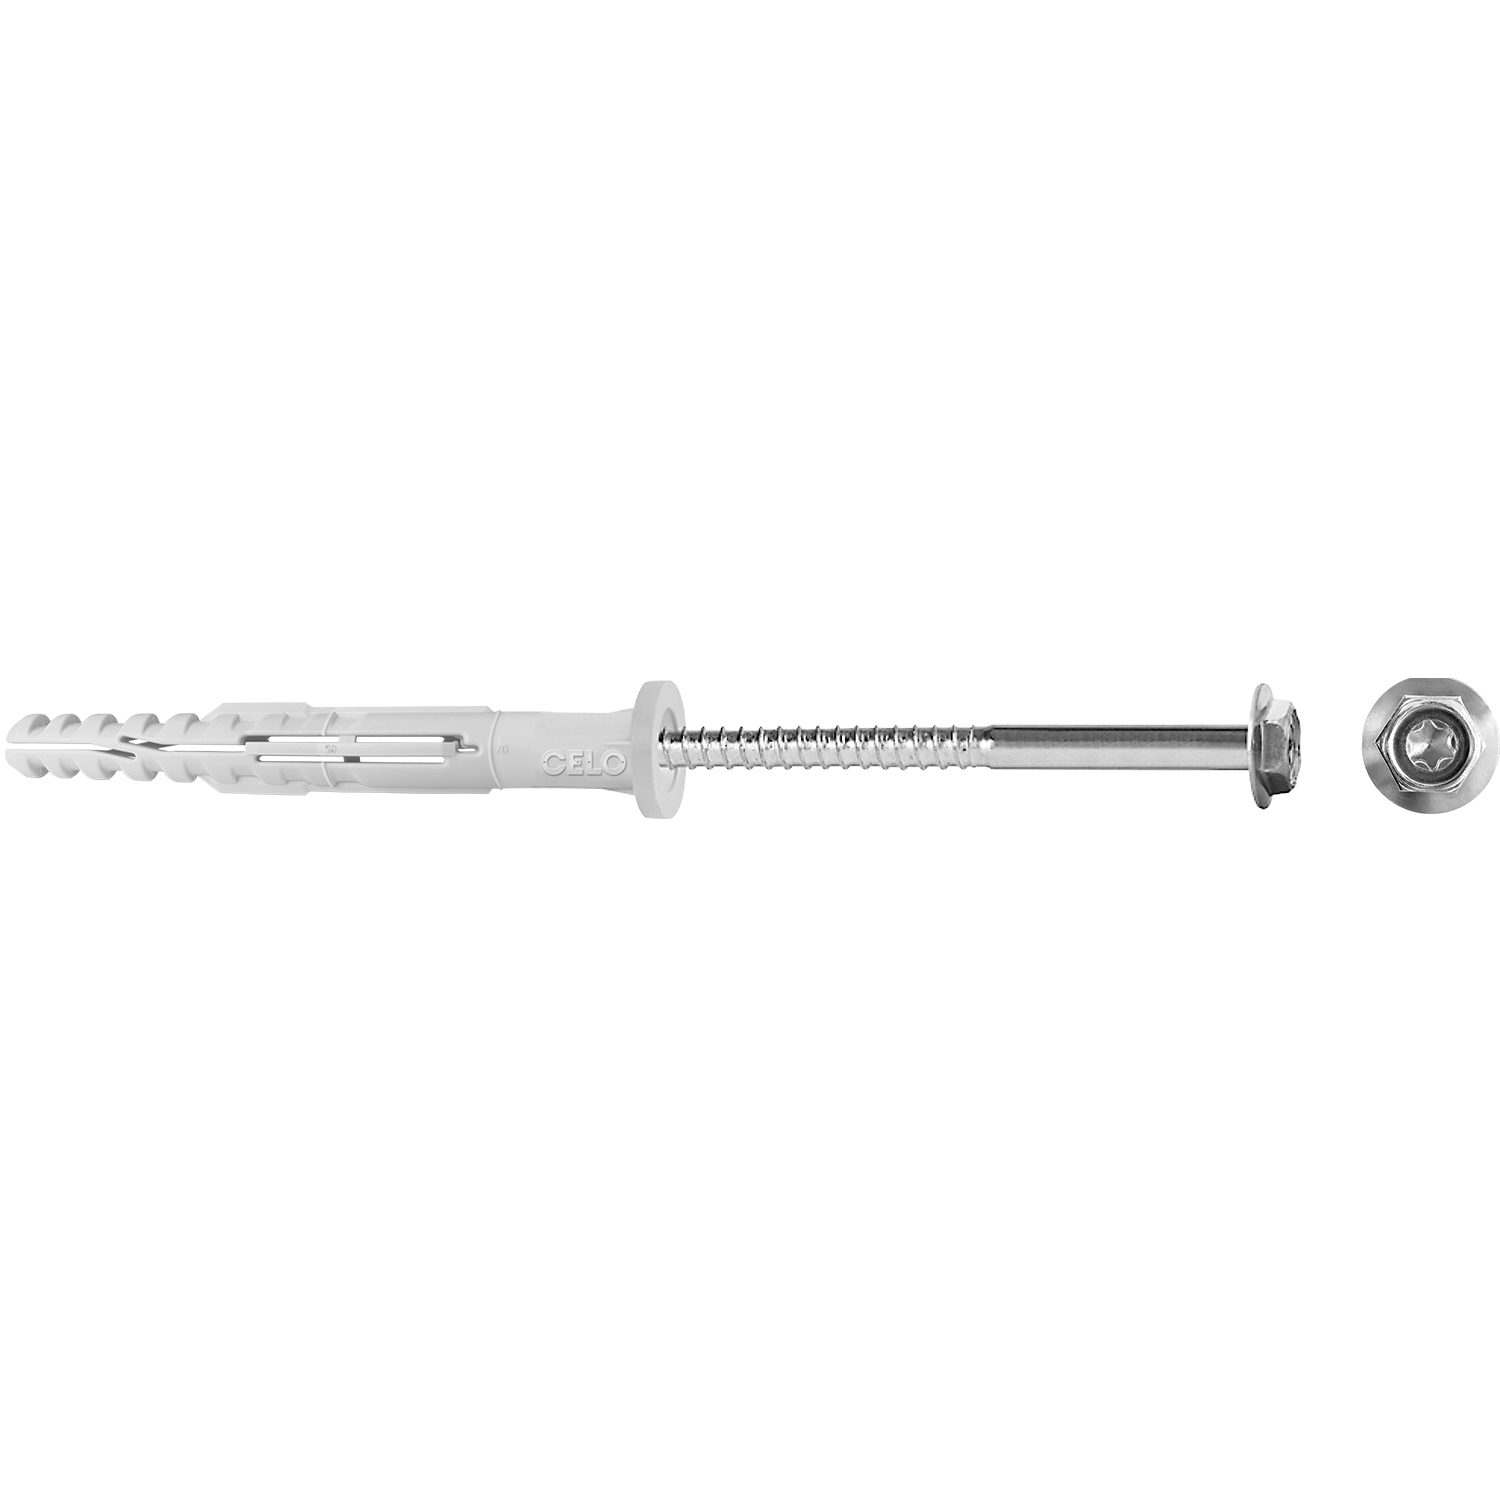 CELO 10mm multifunctional frame plug with stainless hex screw